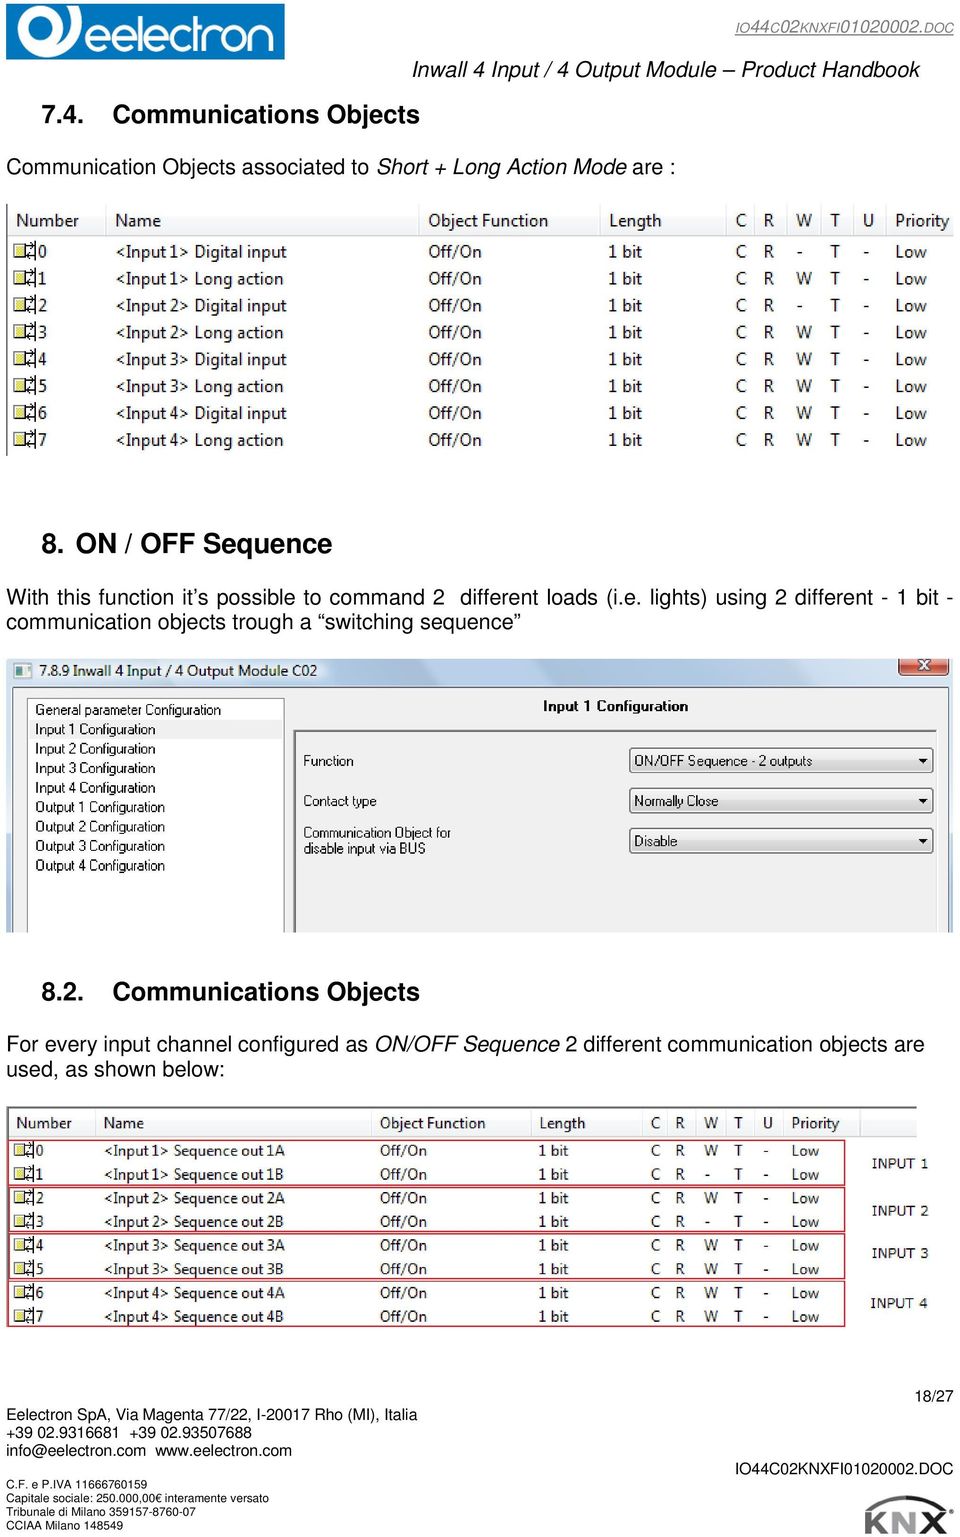 2. Communications Objects For every input channel configured as ON/OFF Sequence 2 different